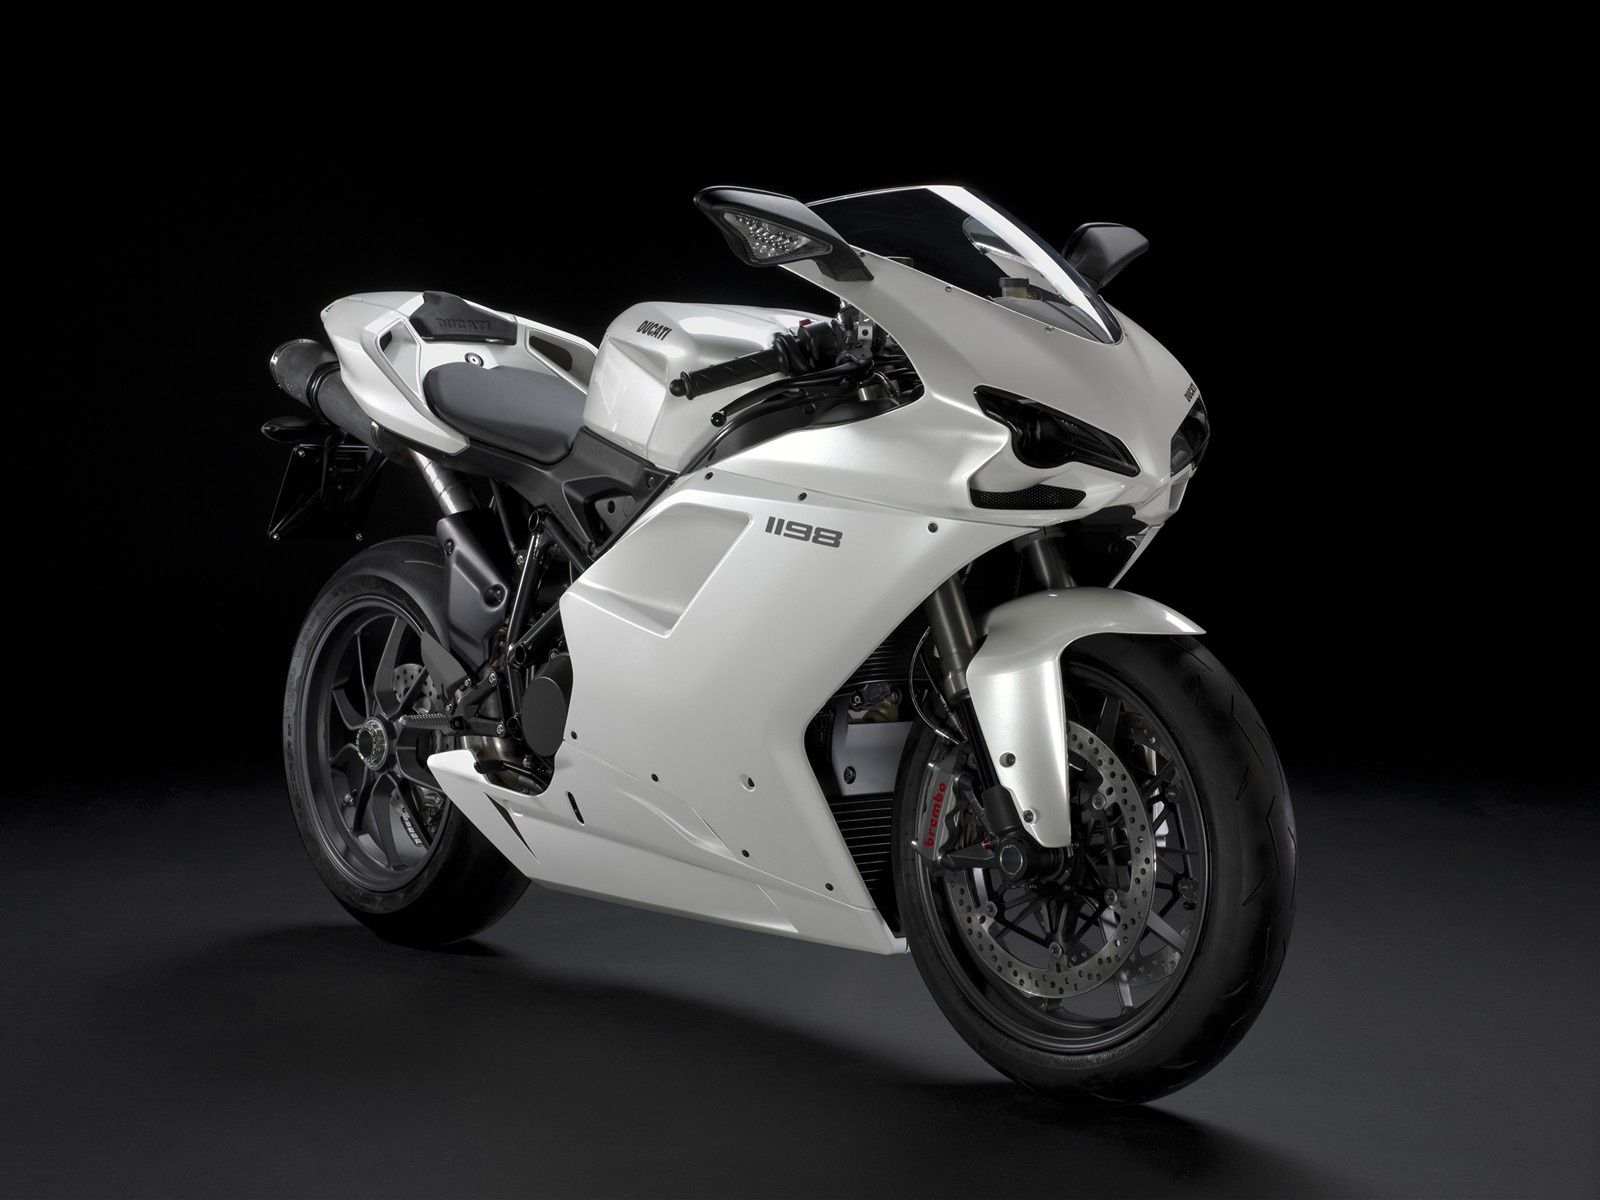 Ducati 1198 White Wallpapers | HD Wallpapers